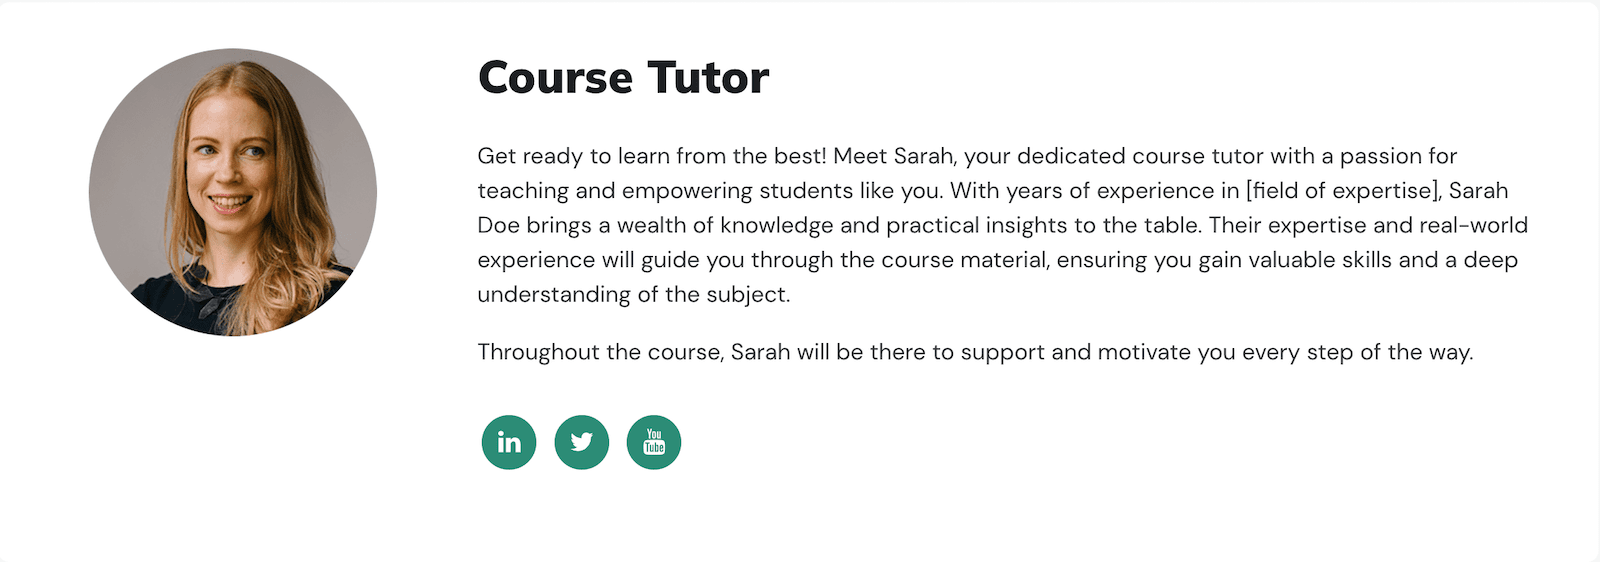 moodle-theme-course-landing-page-tutor-section